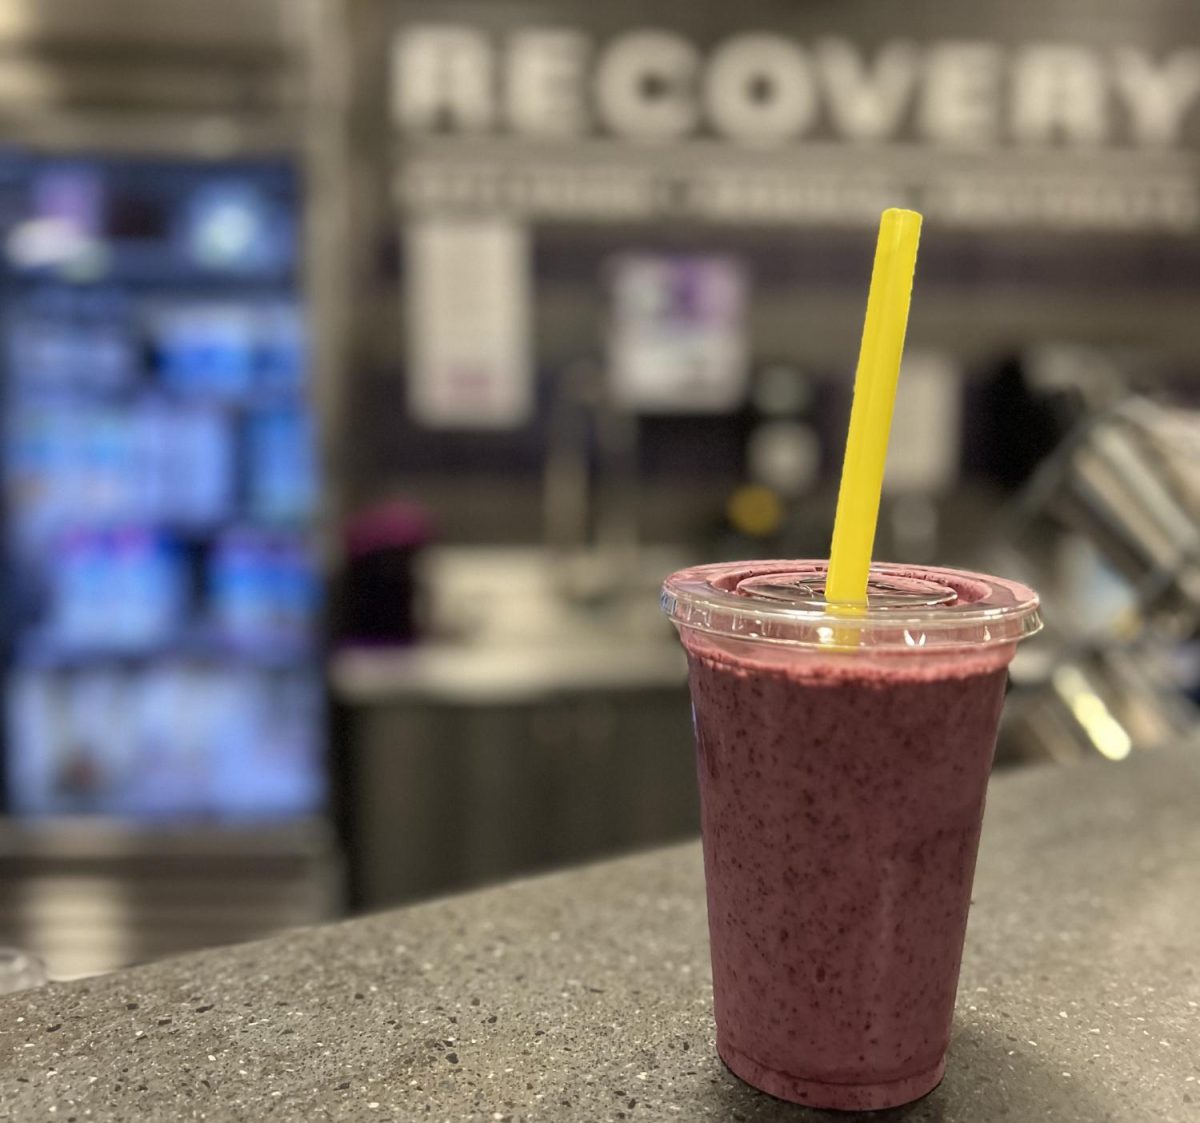 Smoothie+in+front+of+the+sports+nutrition+fueling+station+in+Schollmaier+Arena.+%28Photo+courtesy+of+Claire+Cimino%29